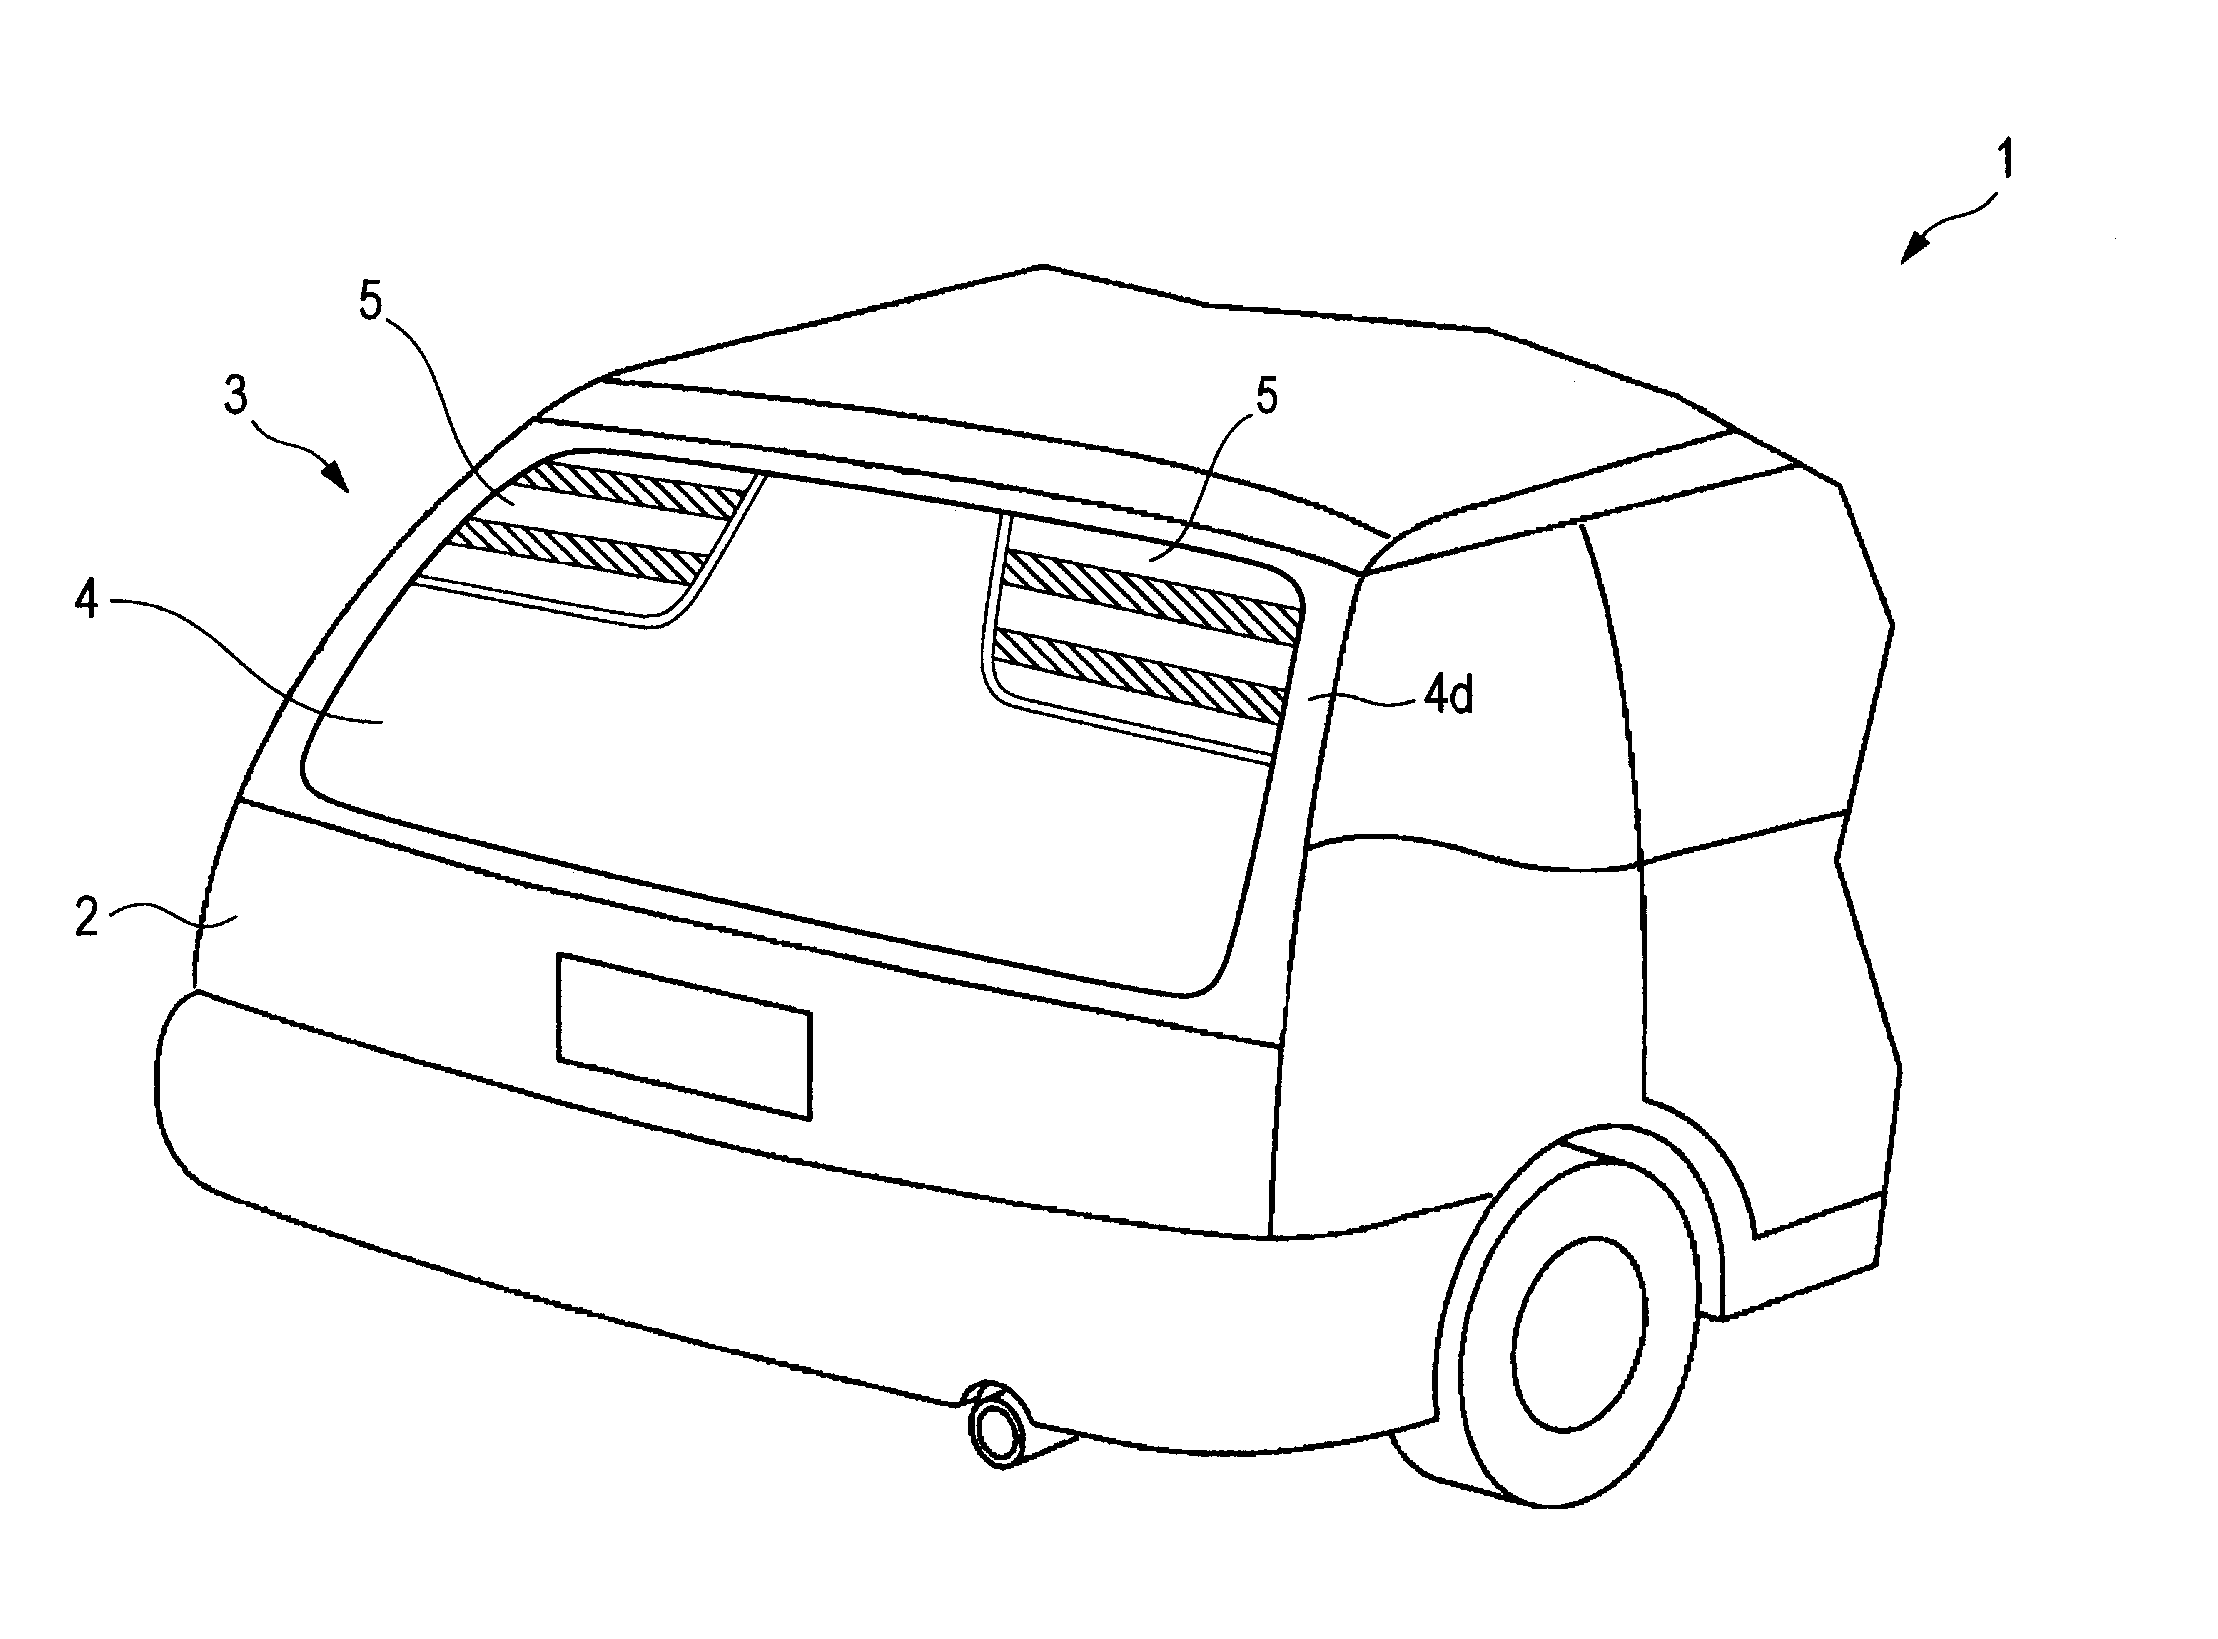 Vehicular lamp and window unit